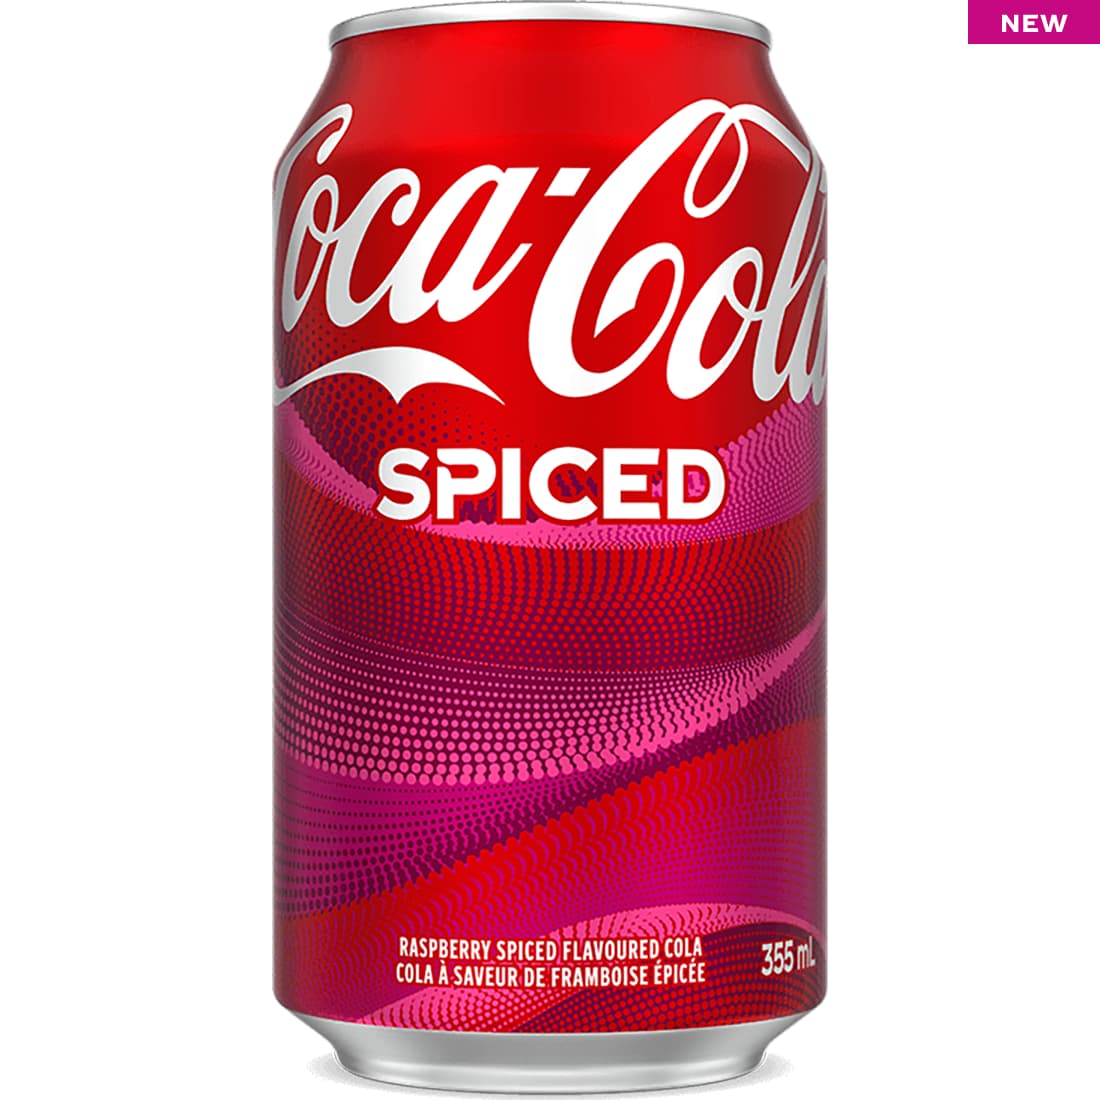 Coca-Cola Spiced - Flavours & Nutrition Facts